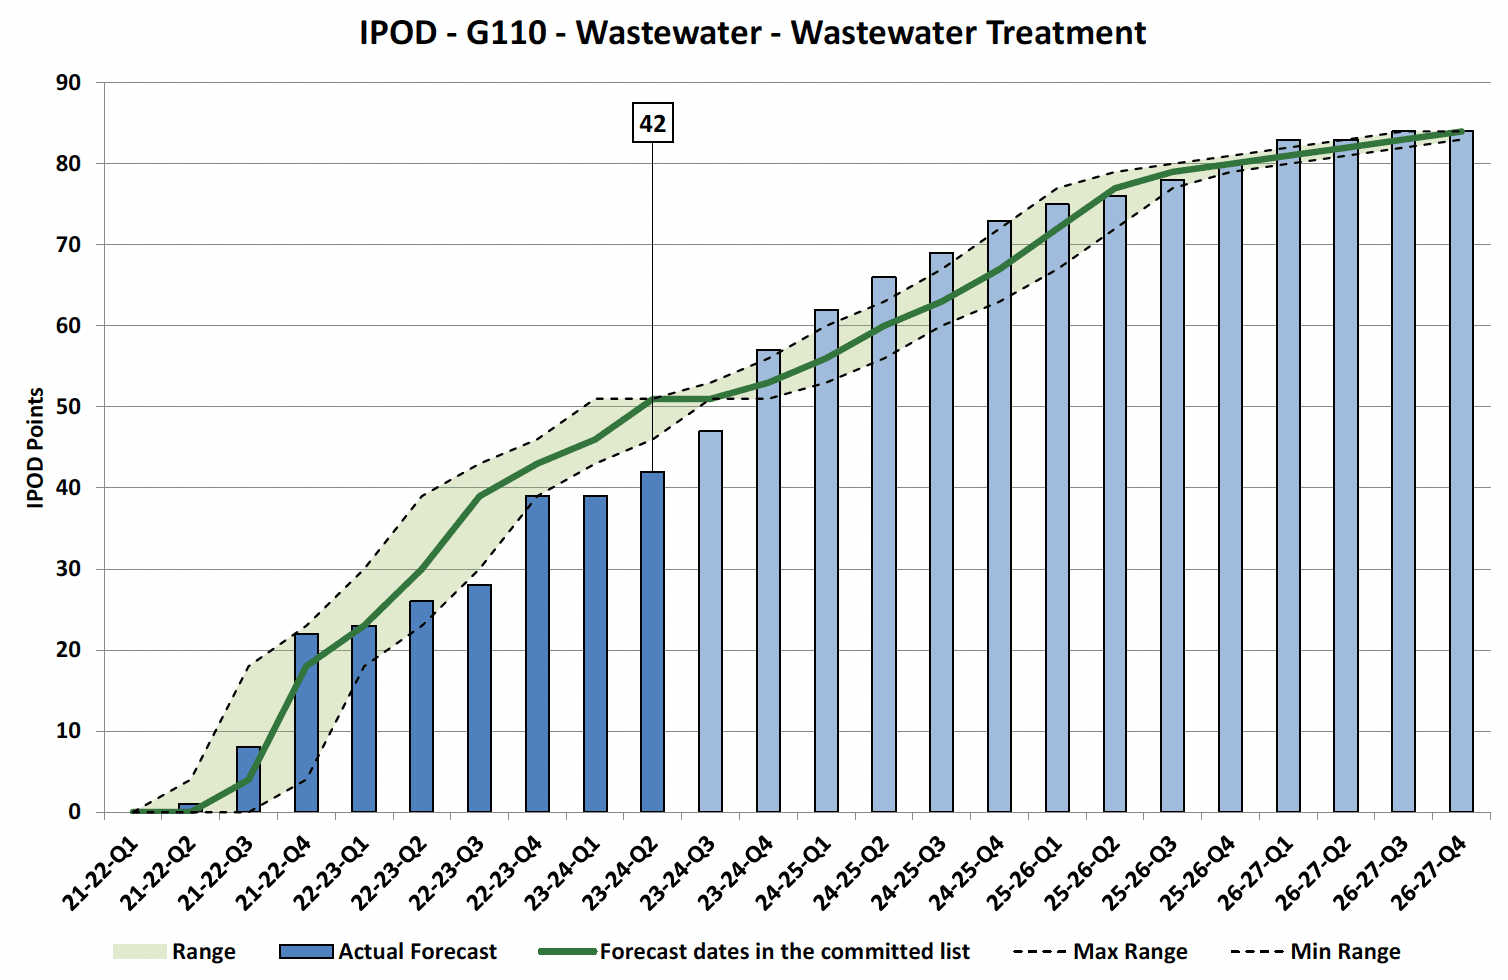 Chart showing IPOD points achieved or forecast for Financial Completion milestone against target range for Wastewater Treatment Projects in Wastewater Portfolio